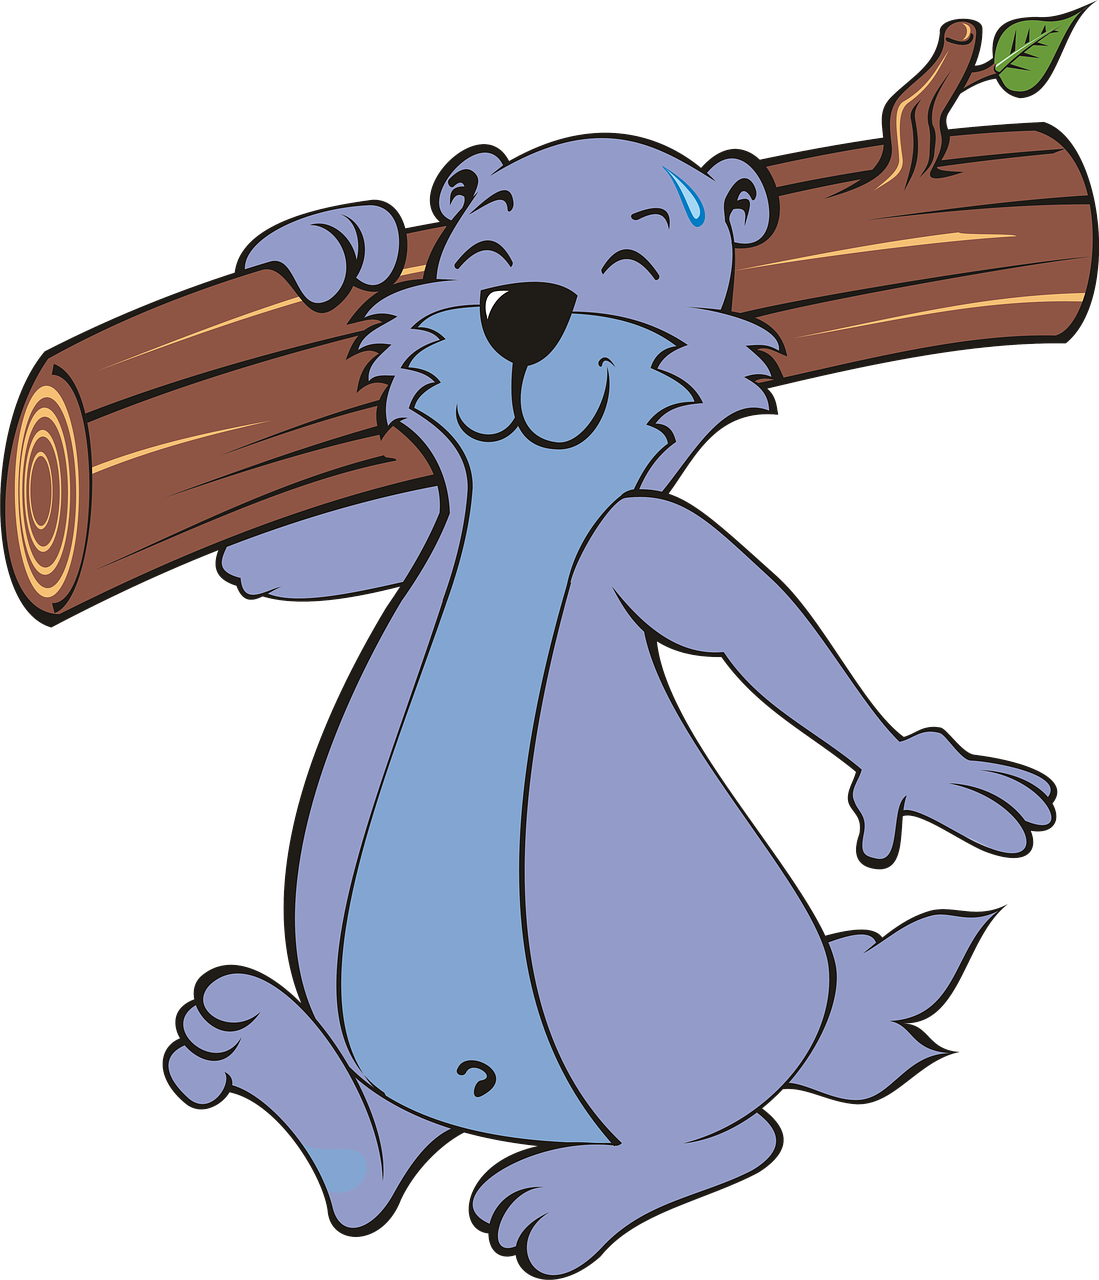 a cartoon bear carrying a piece of wood, inspired by Hanna-Barbera, anthropomorphic furry otter, on black background, bluey, colored accurately